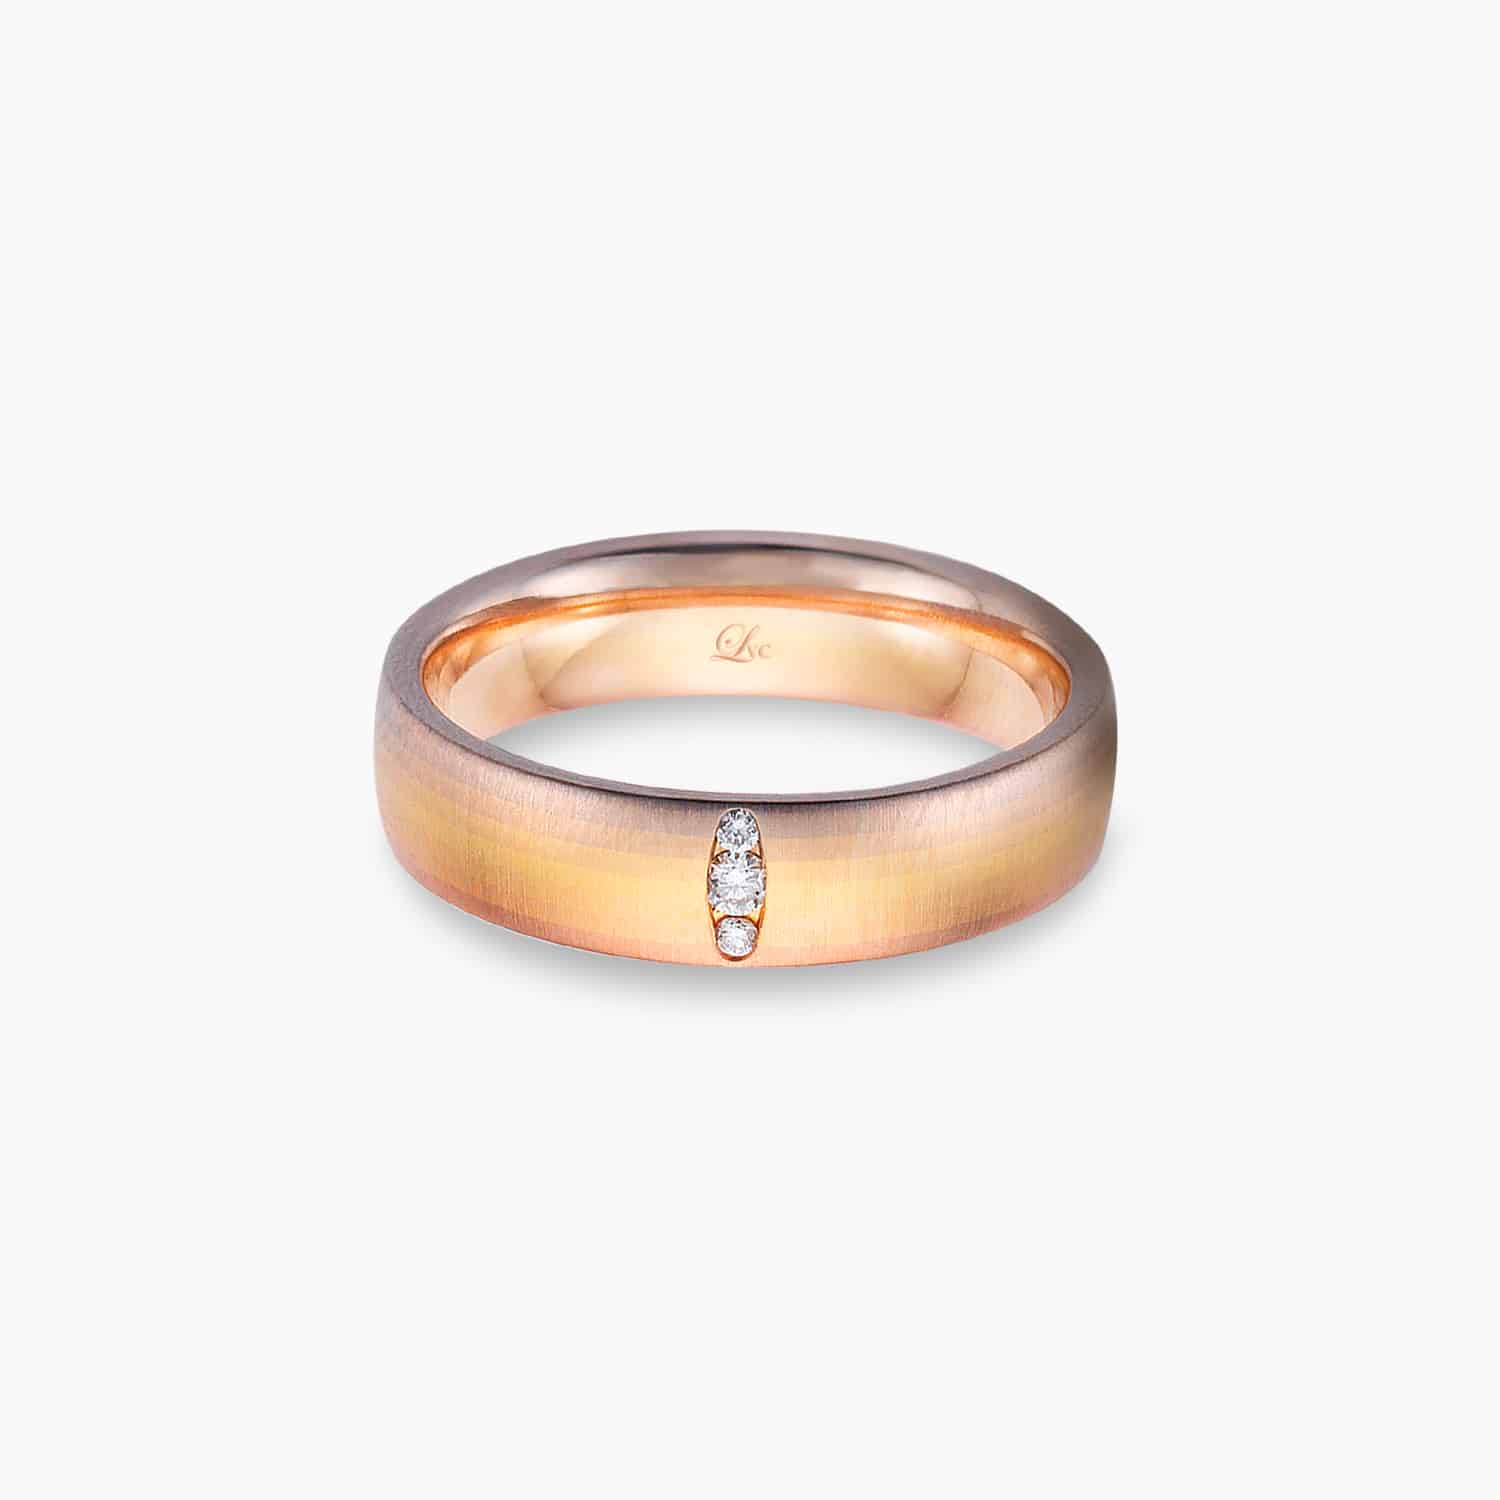 LVC SOLEIL AURORA WEDDING BAND IN YELLOW WHITE AND ROSE GOLD FLUSHED WITH DIAMONDS a wedding band for women with 3 diamonds 金 戒指 钻石 戒指 cincin diamond